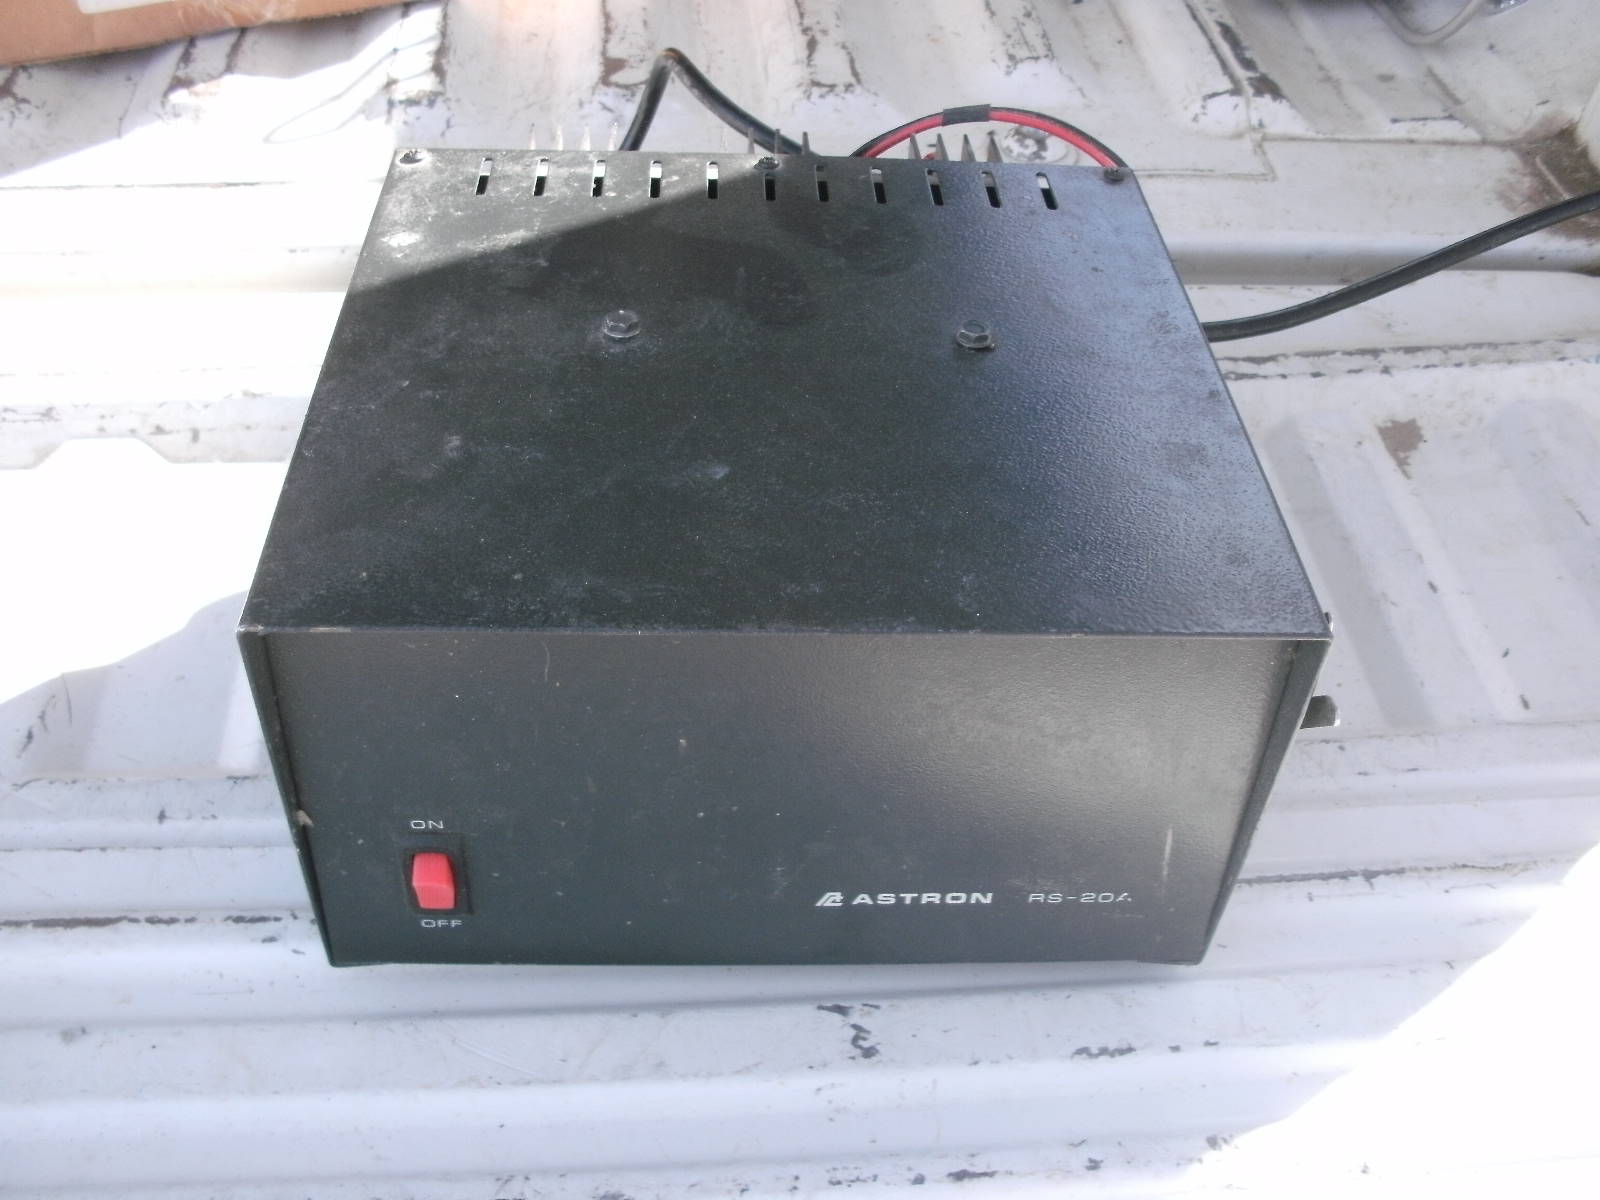 Ham Radio Stuff For Sale: Astron RS-20A power supply